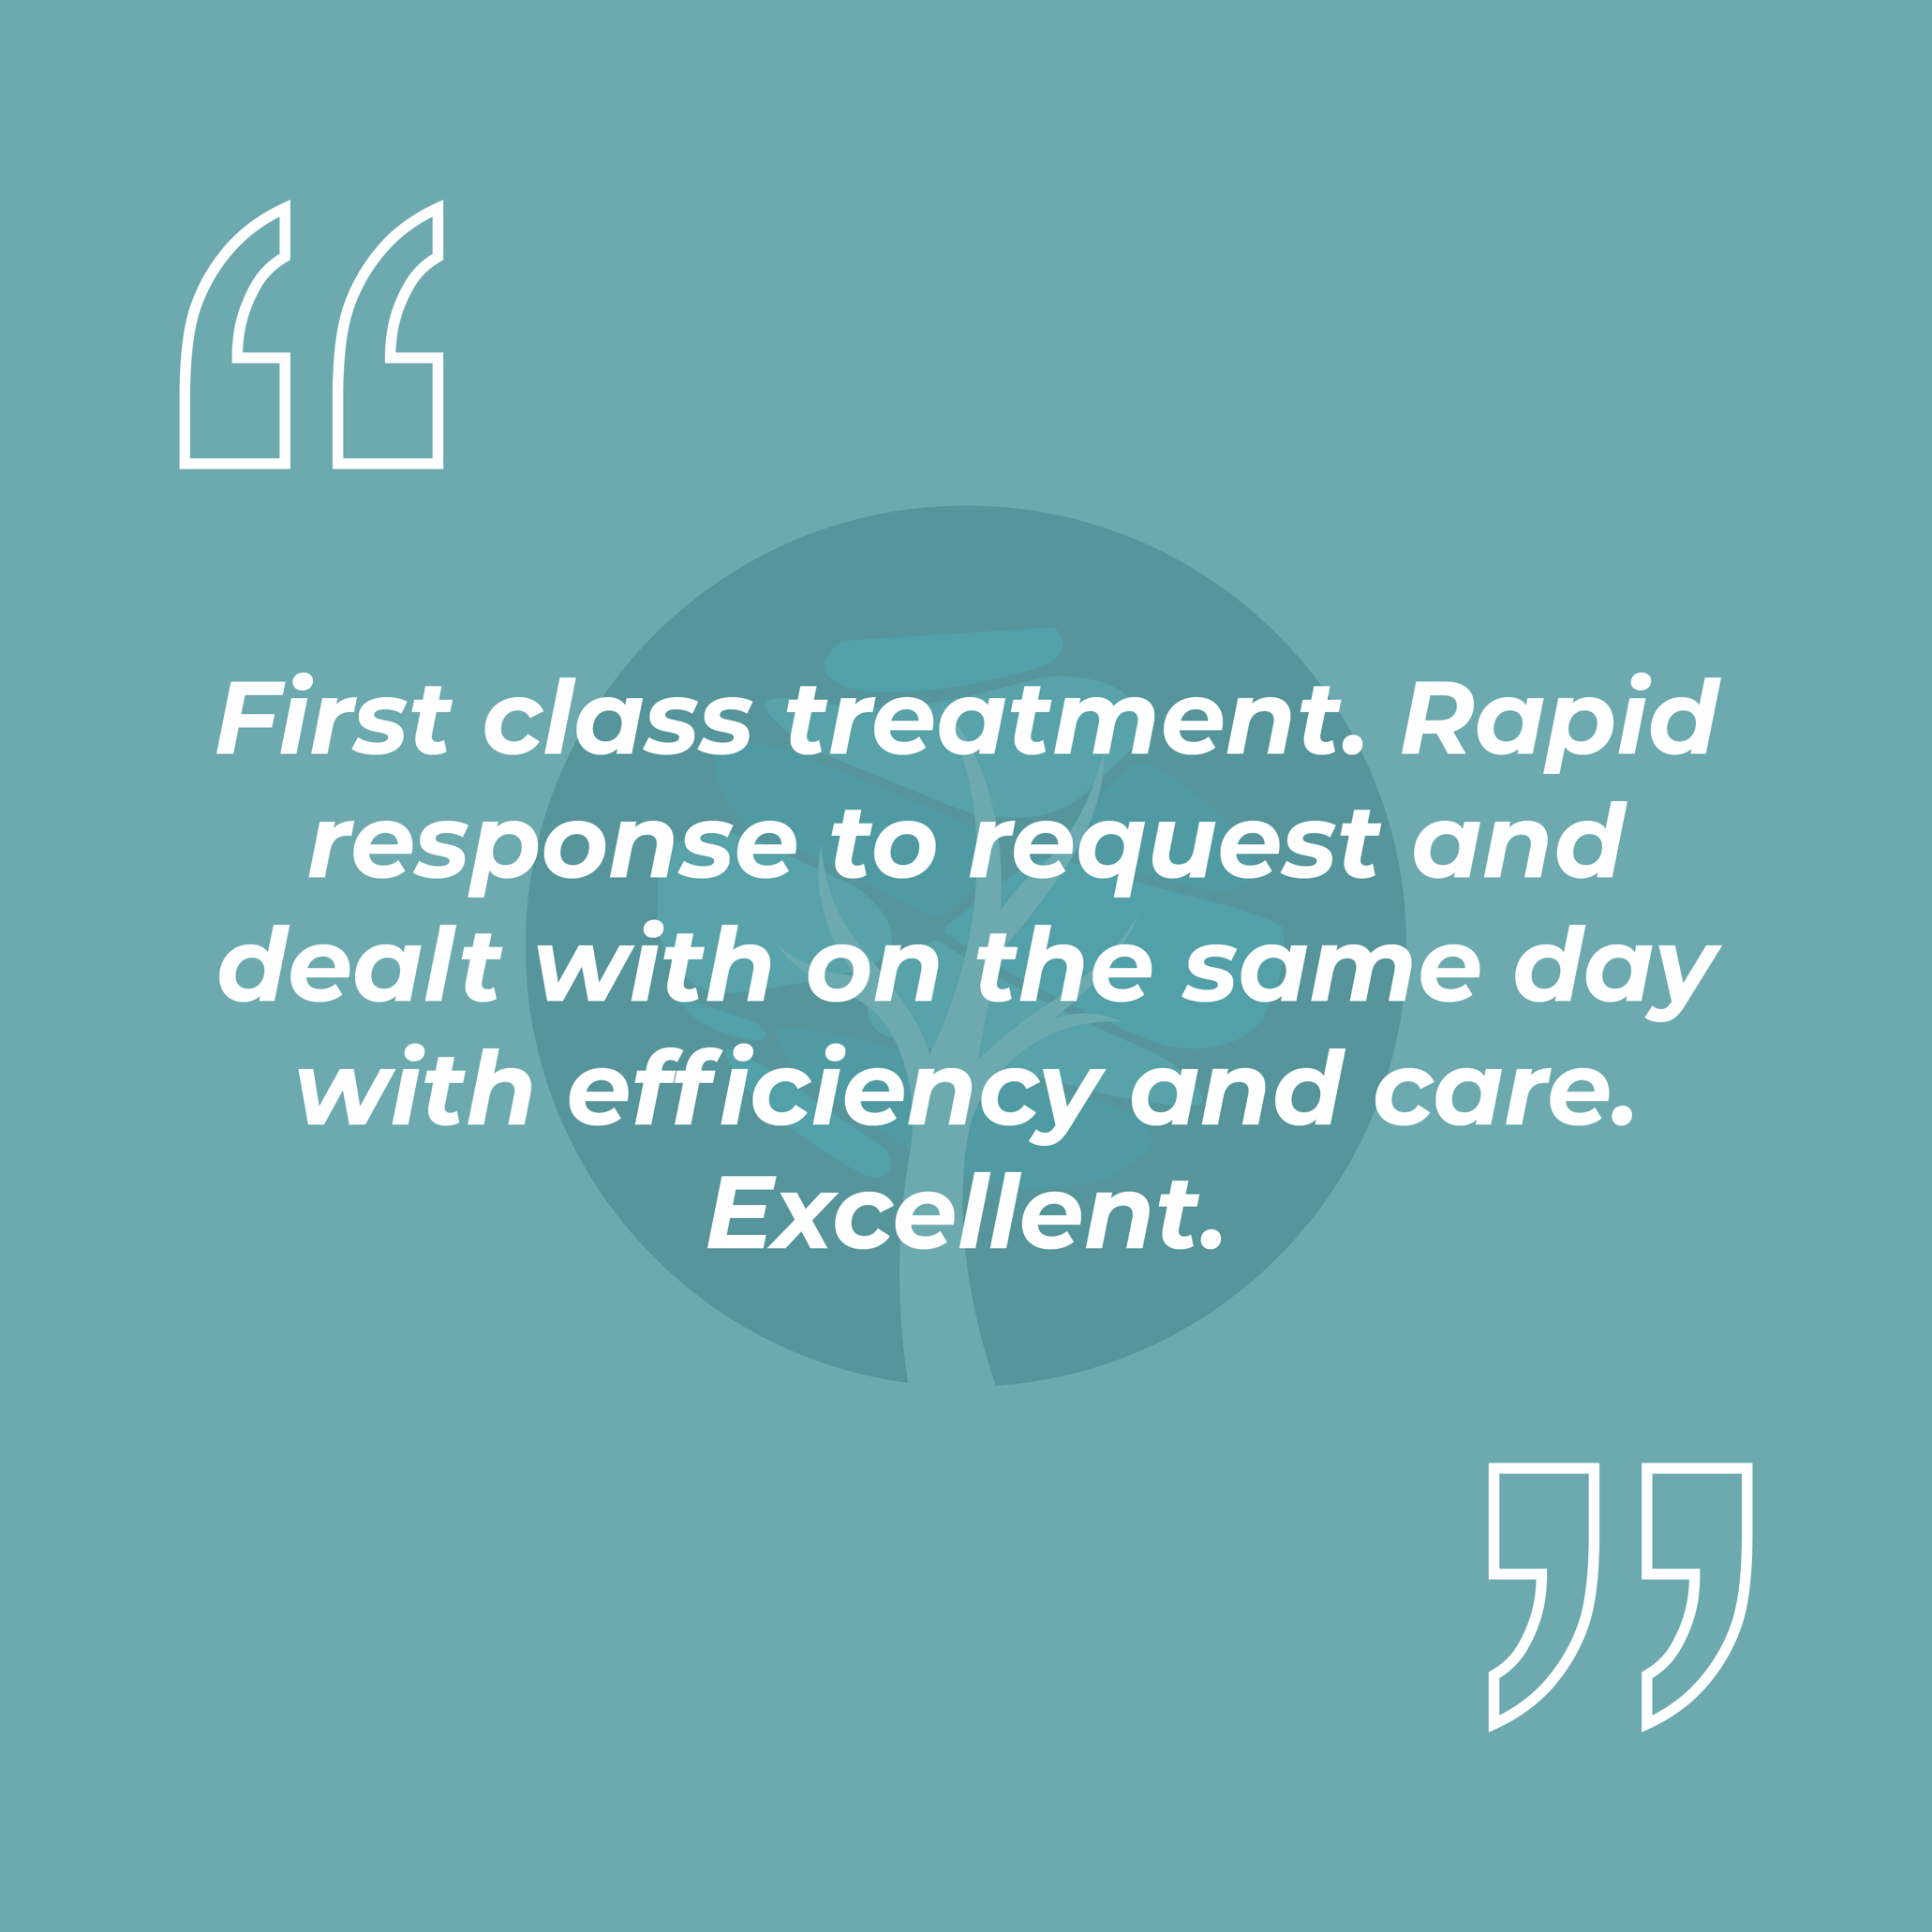 First class treatment. Rapid response to request and dealt with on the same day with efficiency and care. Excellent.